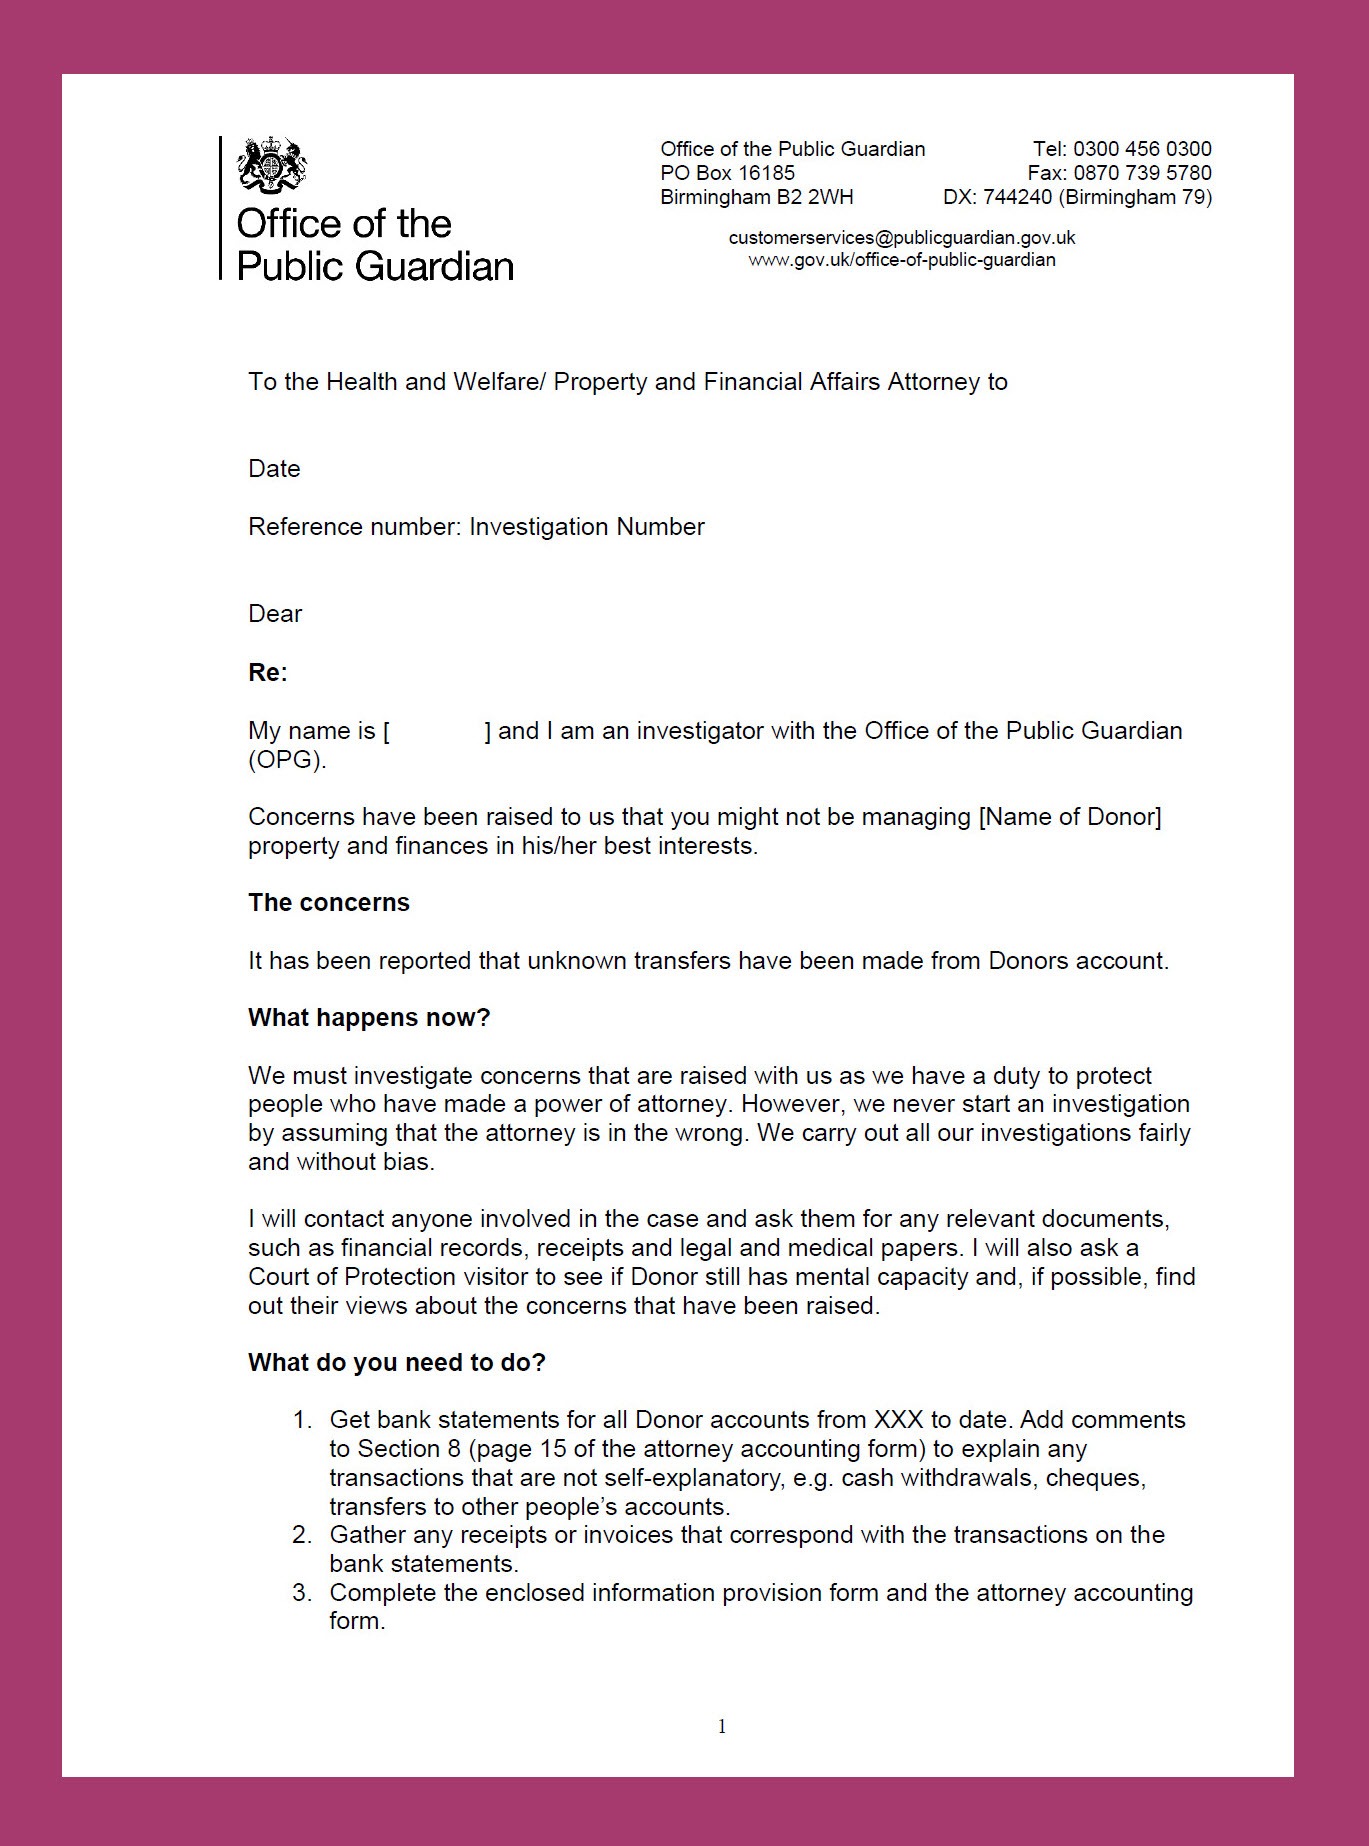 Have you received a letter from the Office of the Public Guardian?